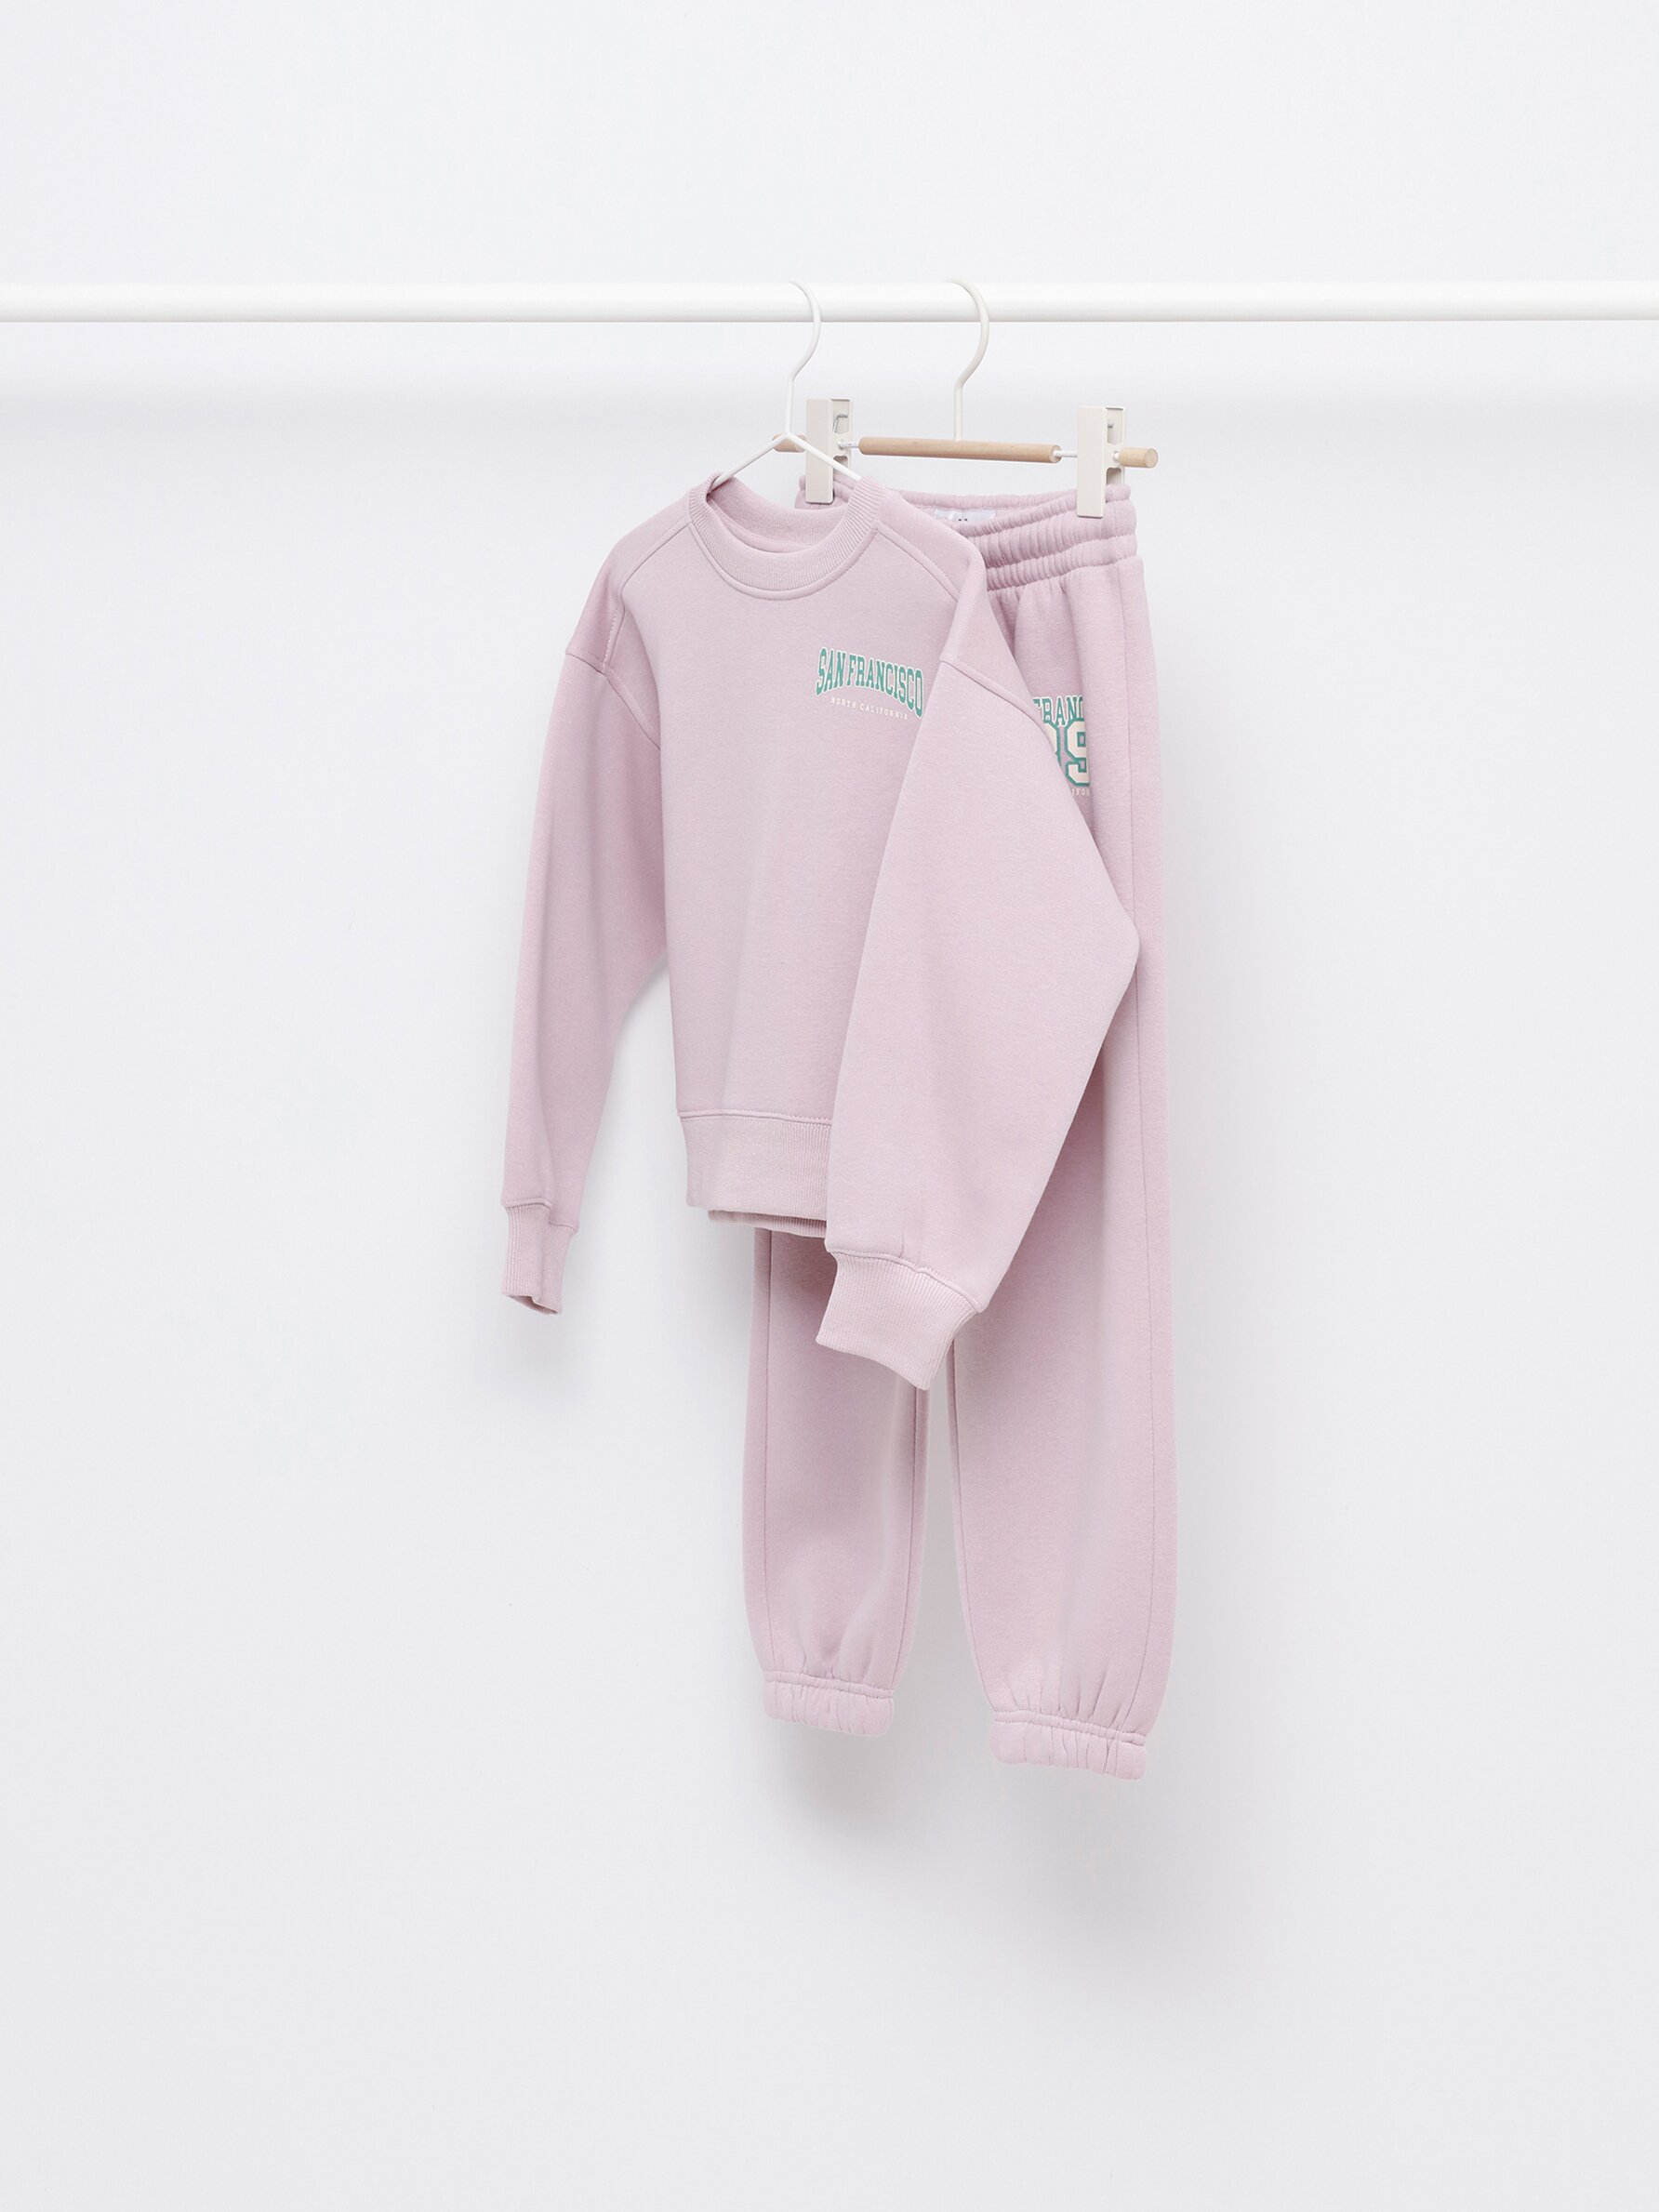 Junior Girls' Sweatshirts and Tracksuits Collection 2023